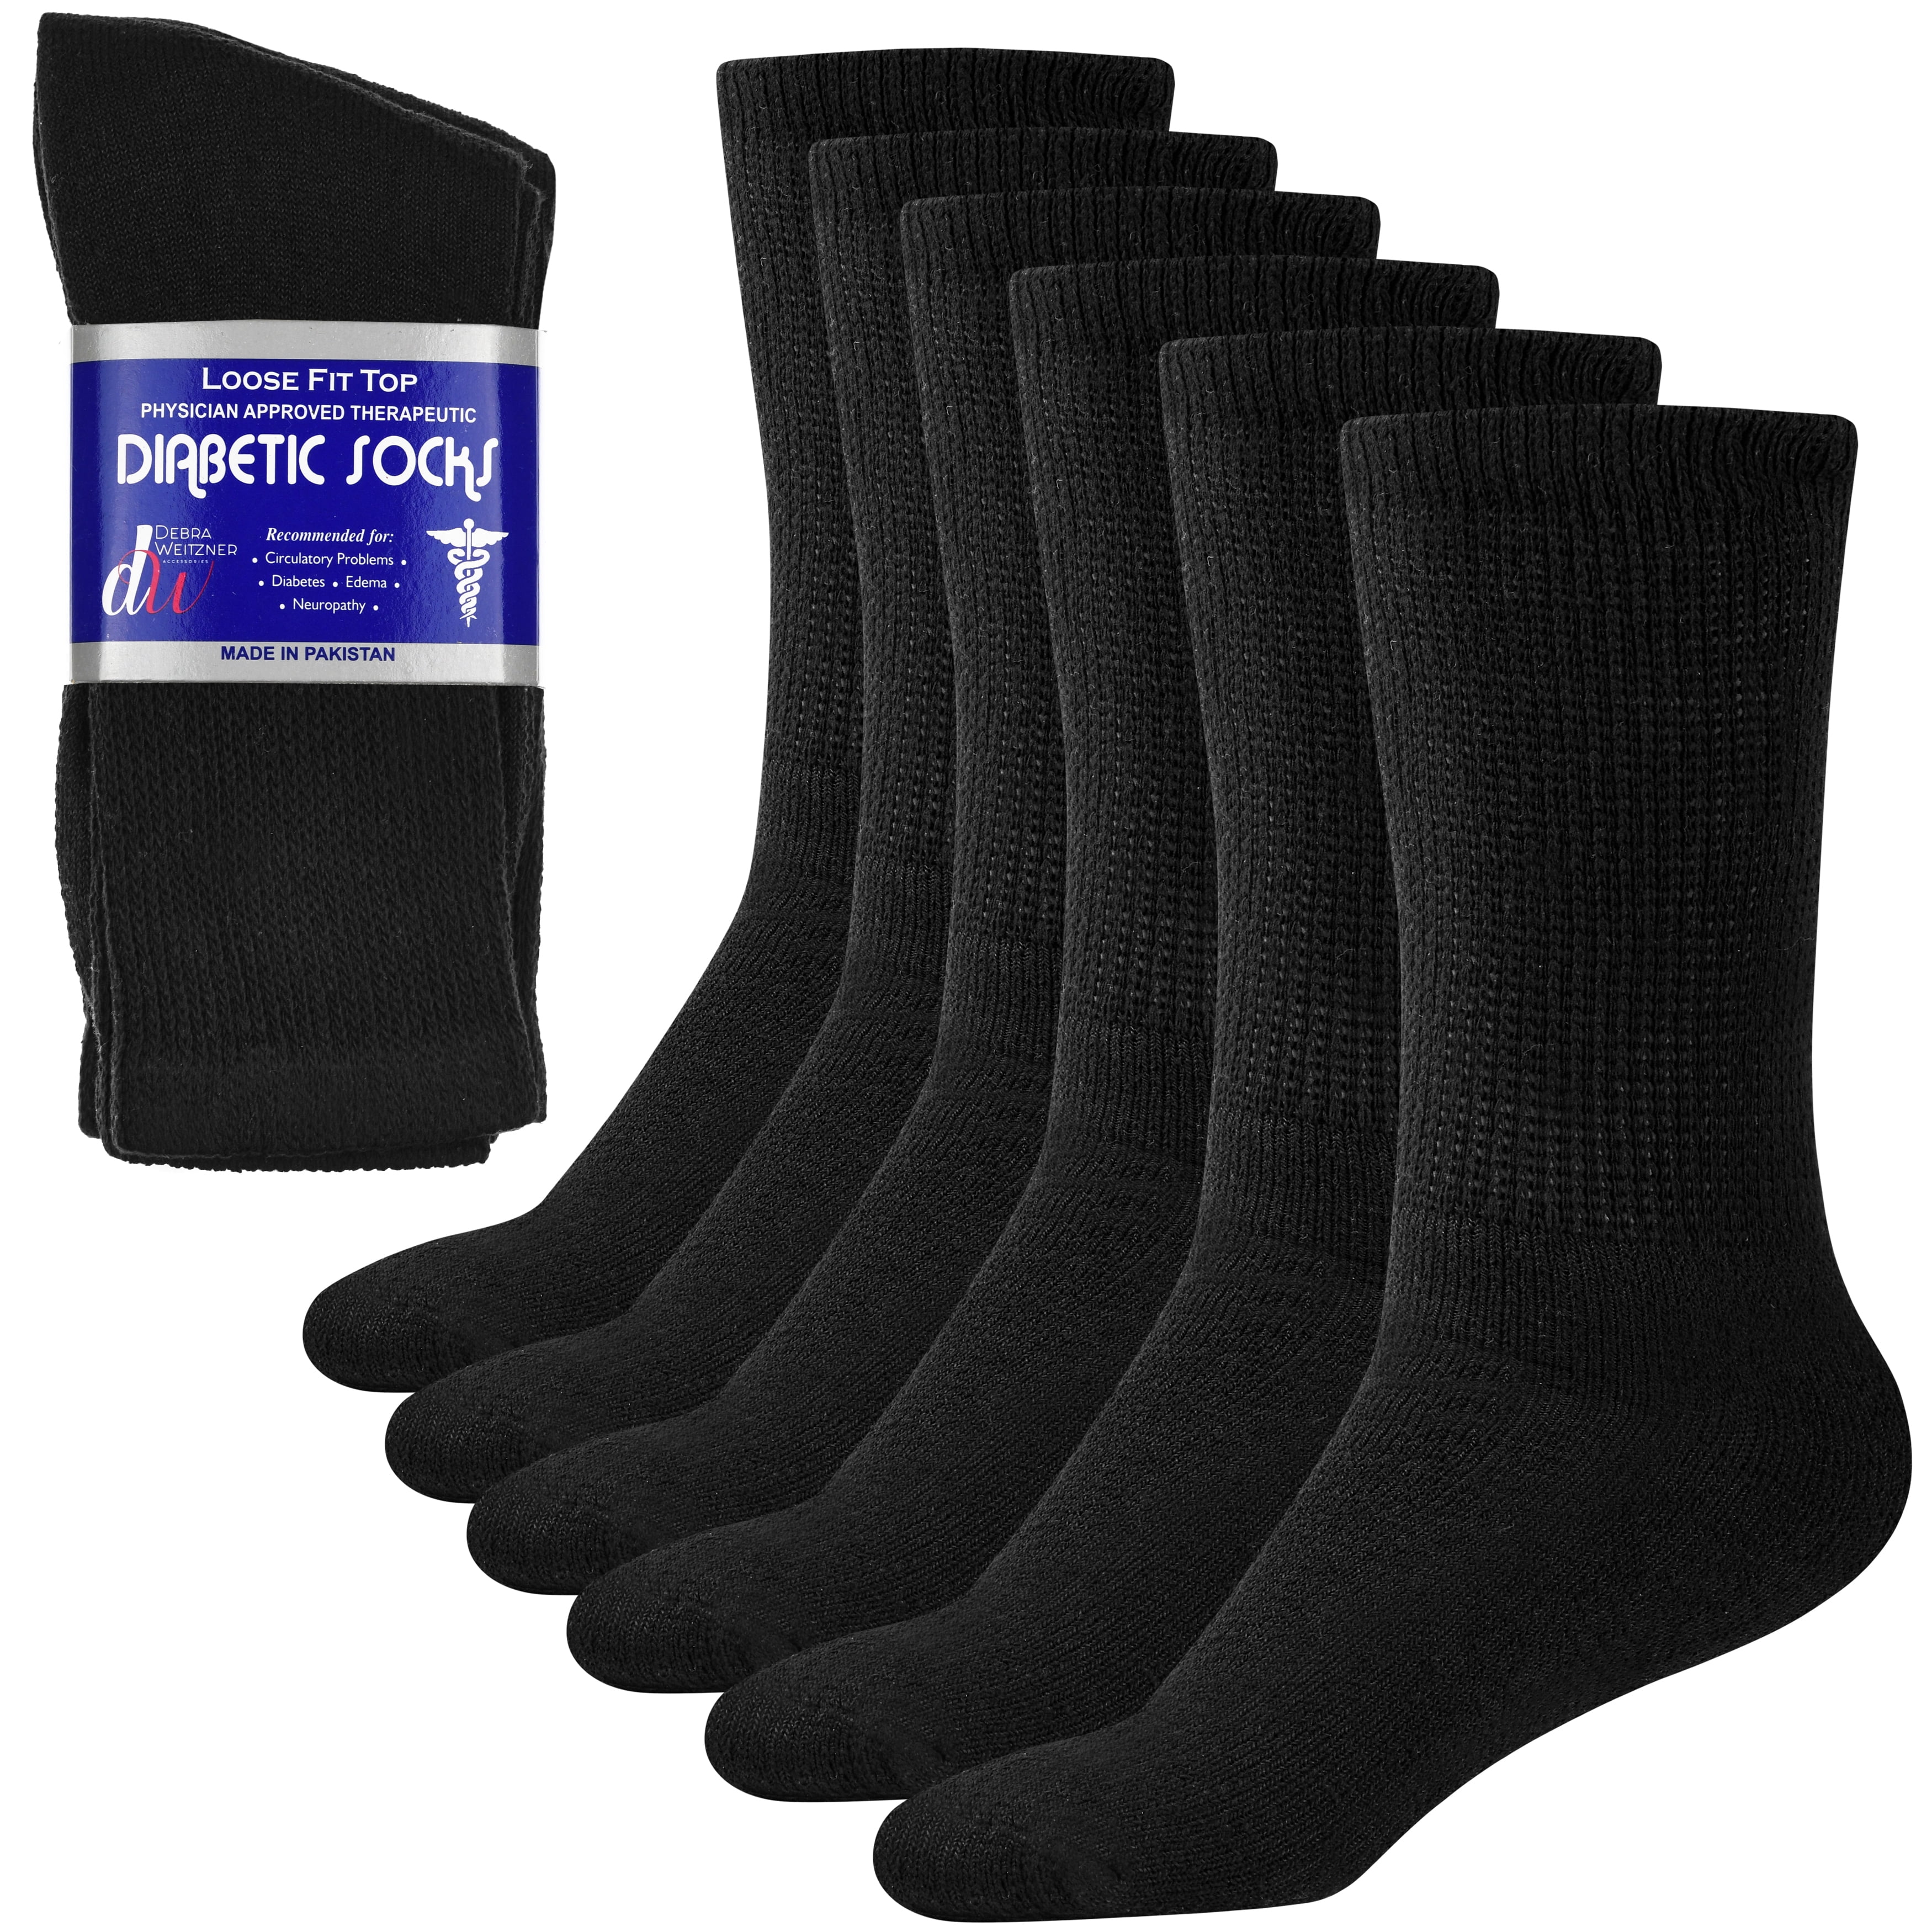 Mens Socks Combed Cotton Comfortable Classic Patterned Dress Socks Size 6-11 6 Pack 